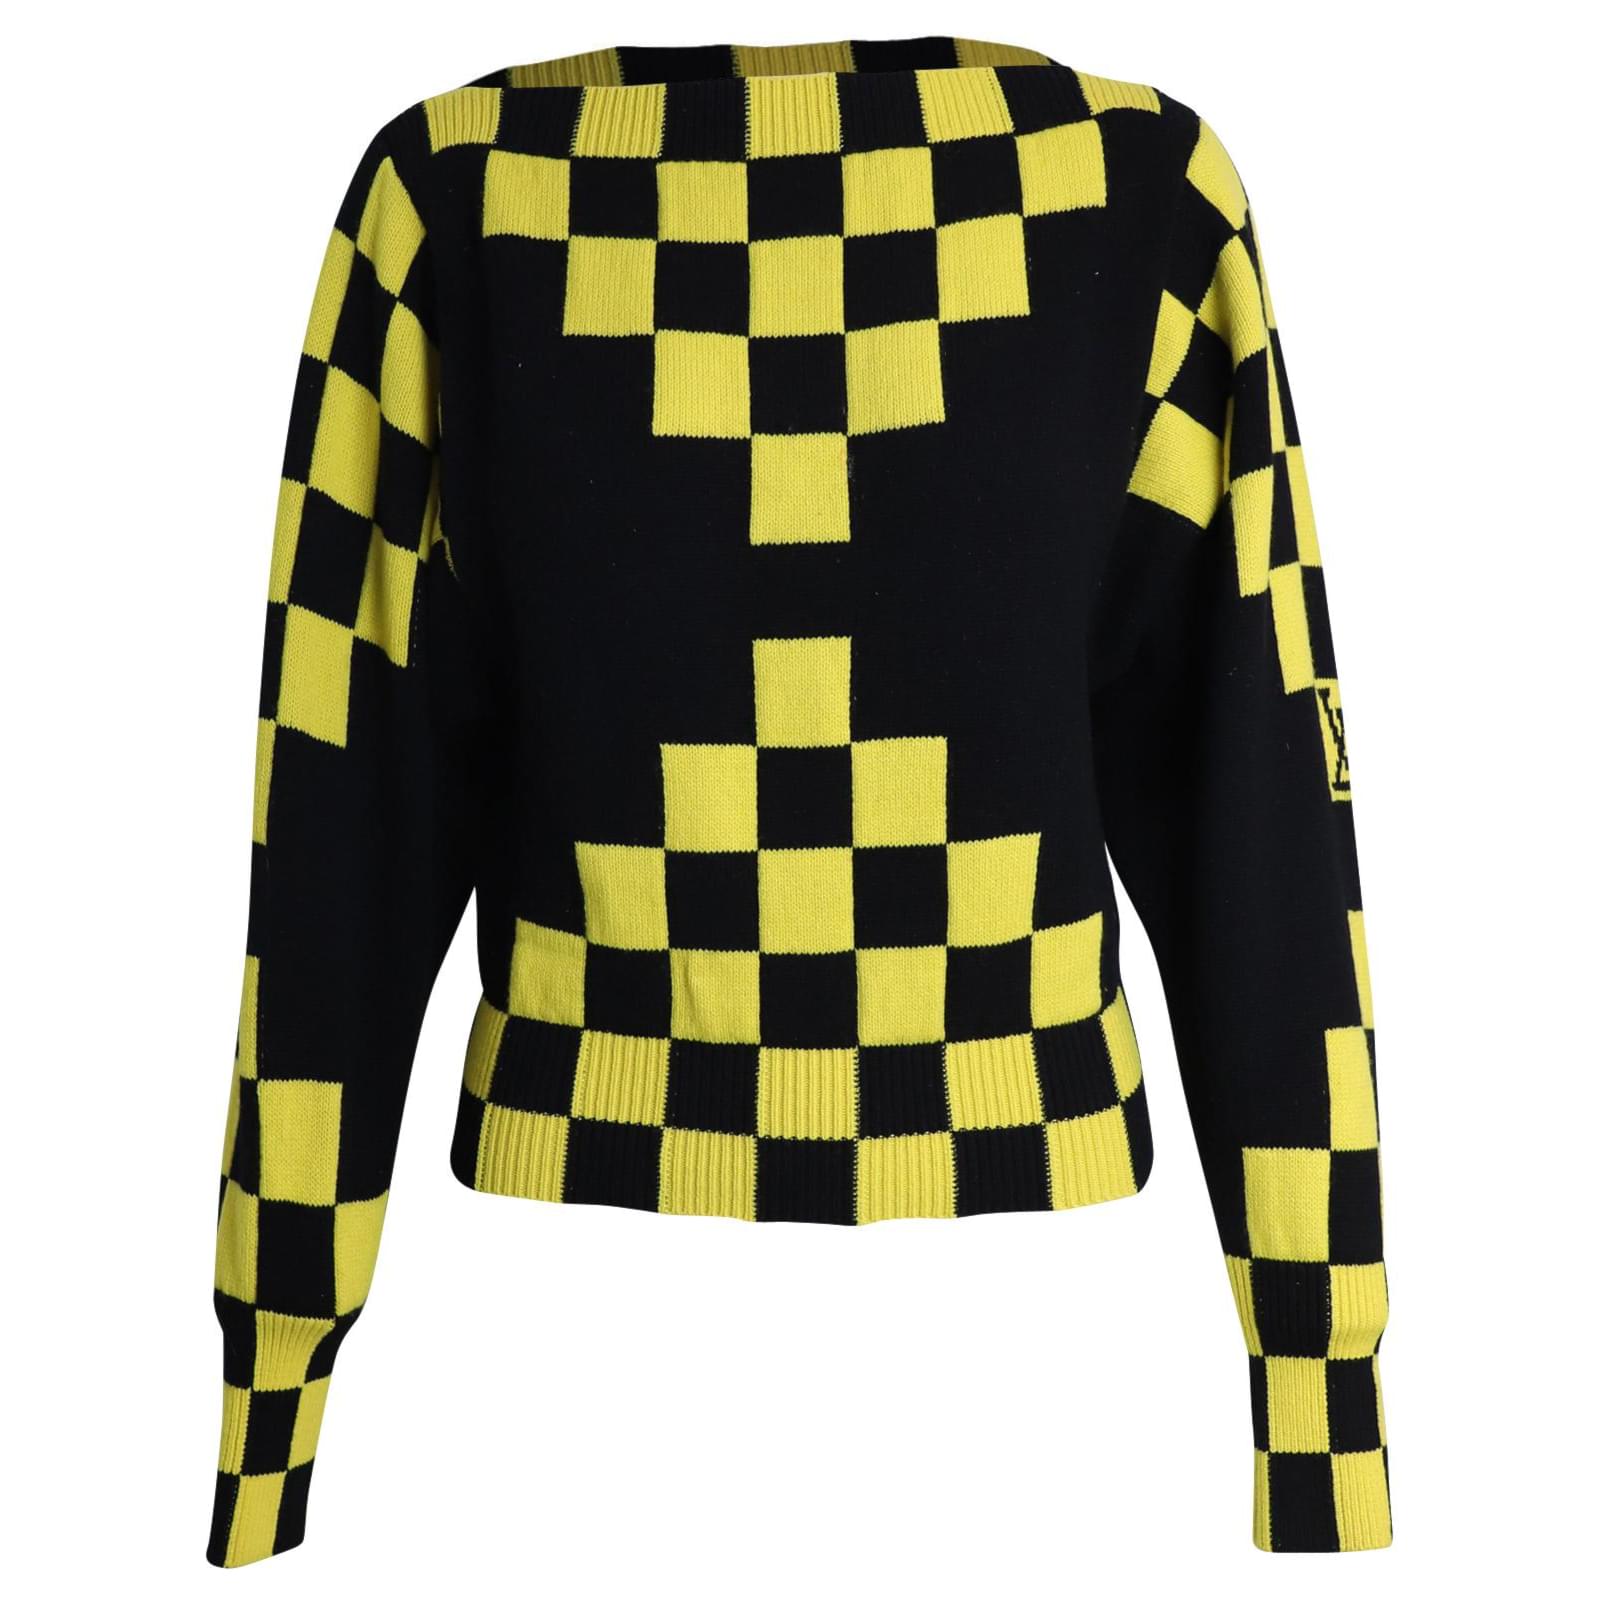 Louis Vuitton Checkerboard Sweater in Black and Yellow Wool